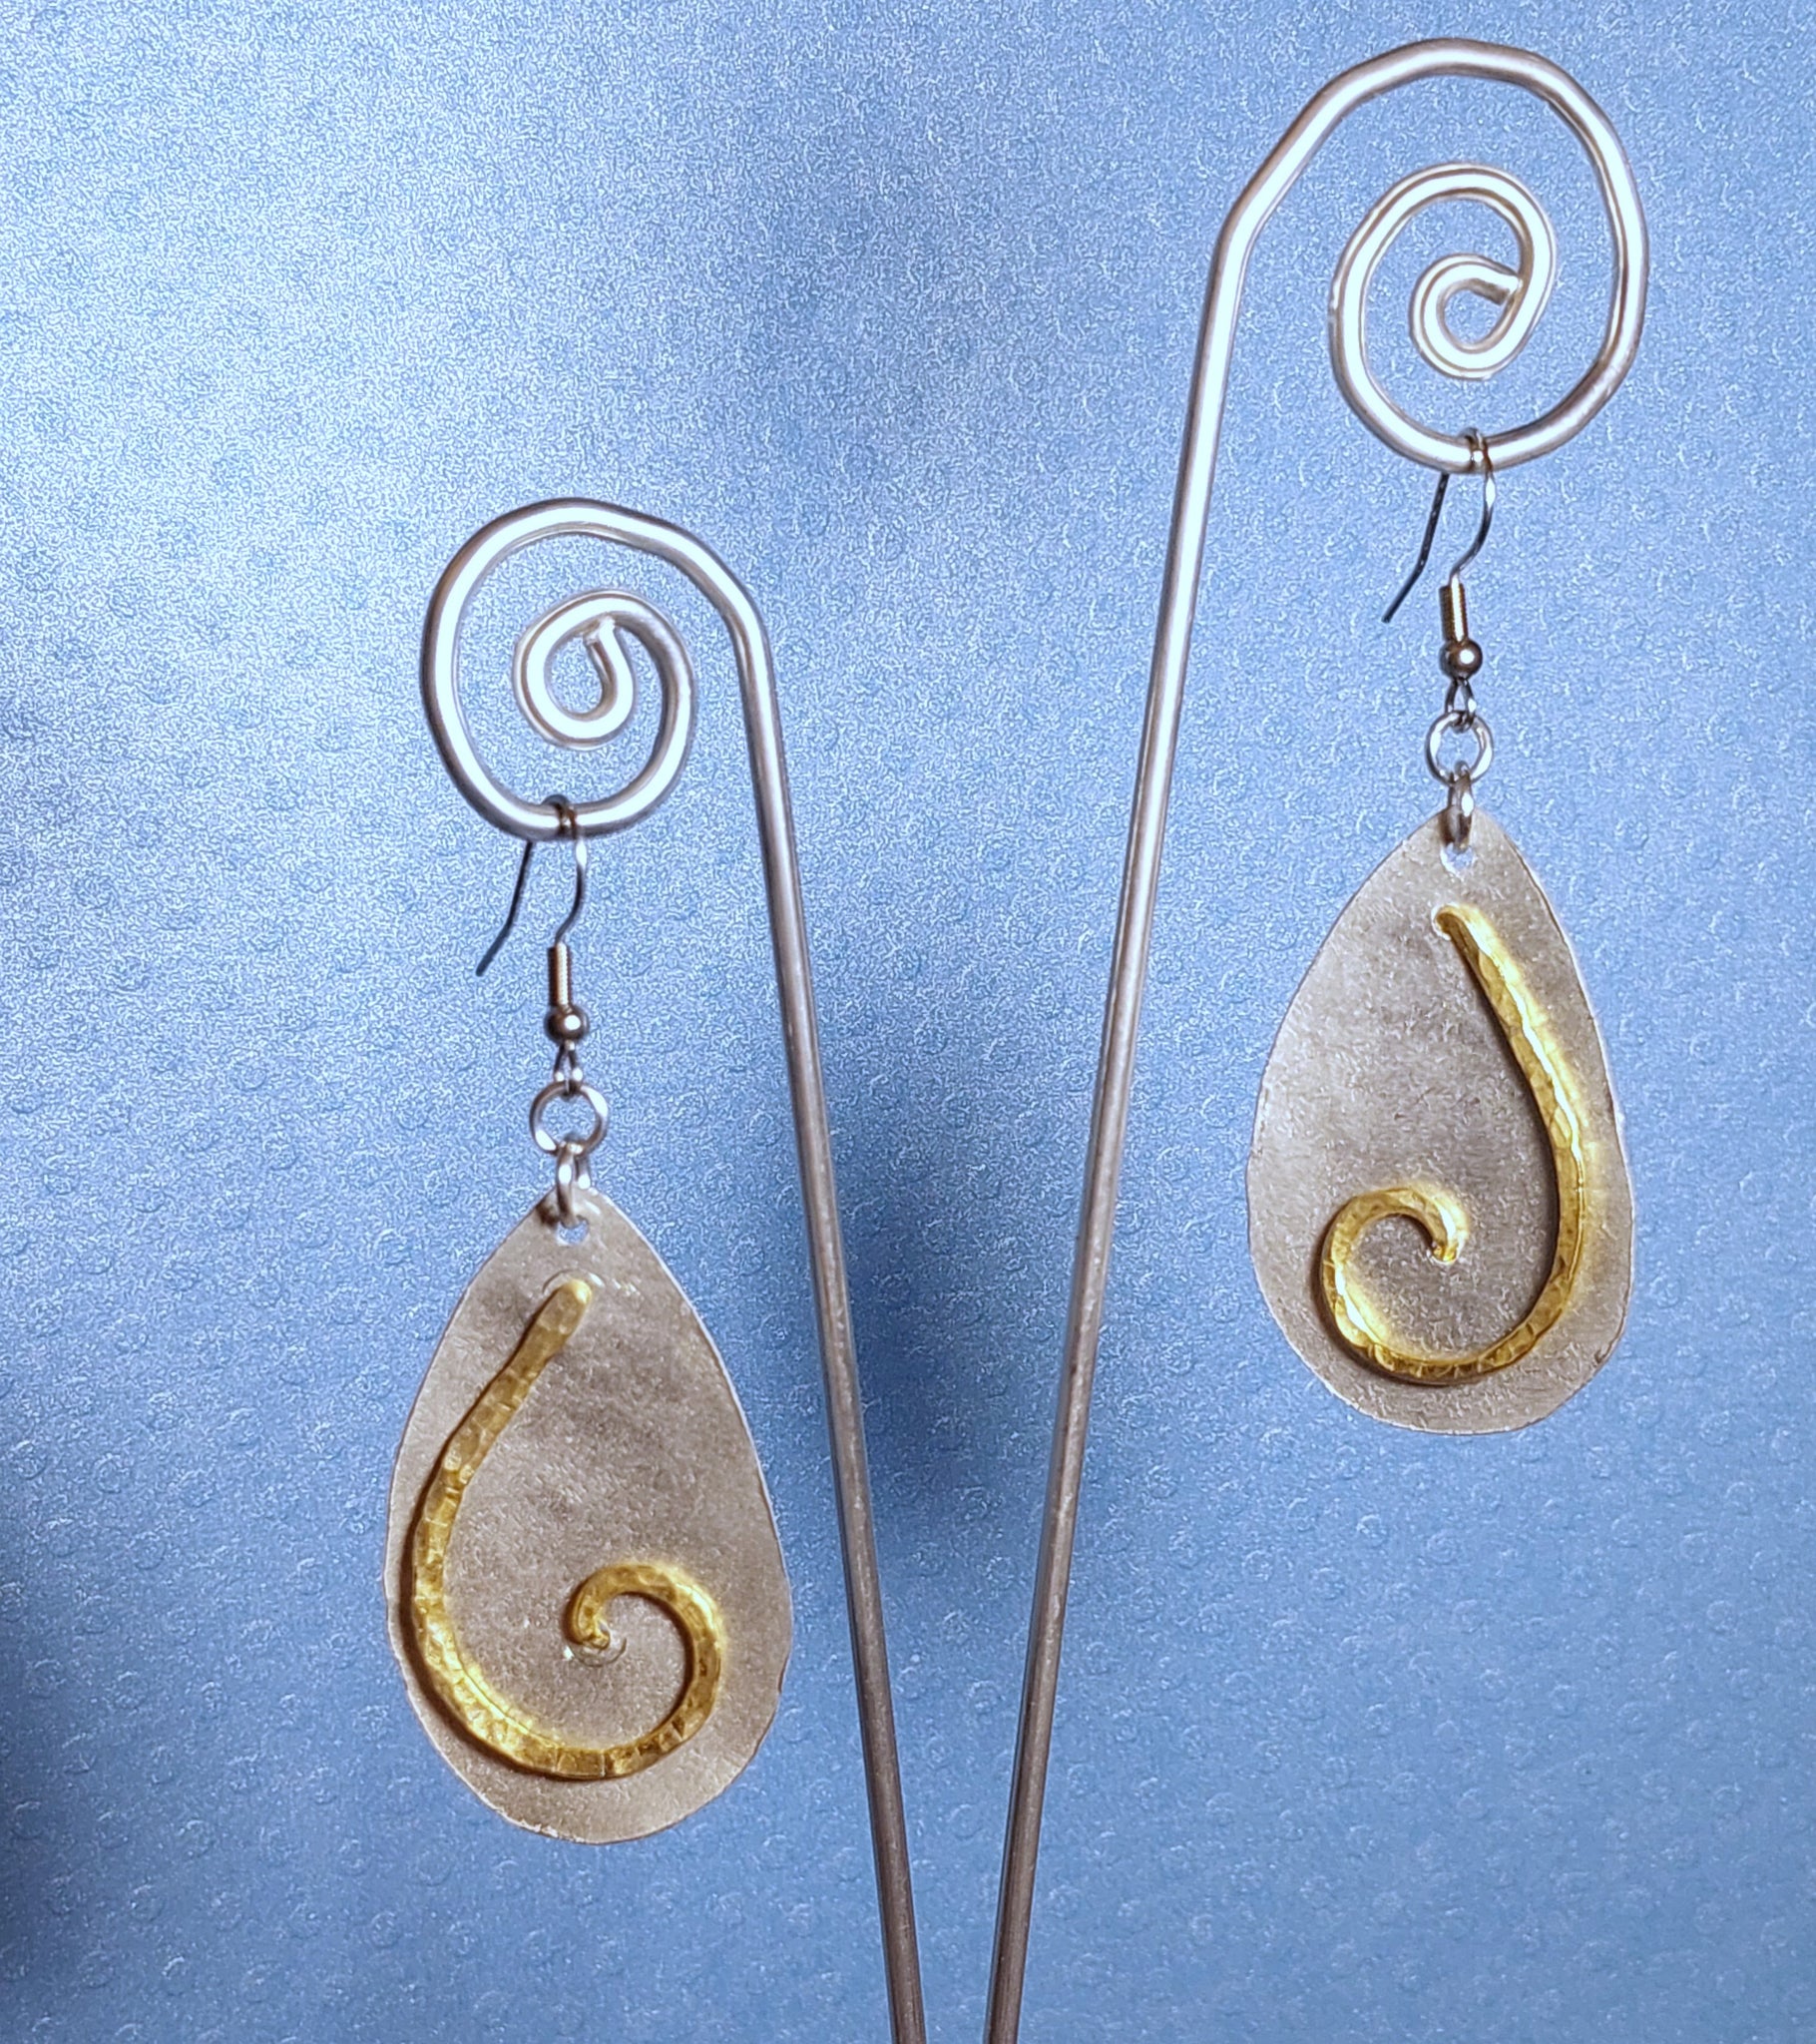 Handcrafted Hammered Aluminum Teardrop with Swirl Earrings